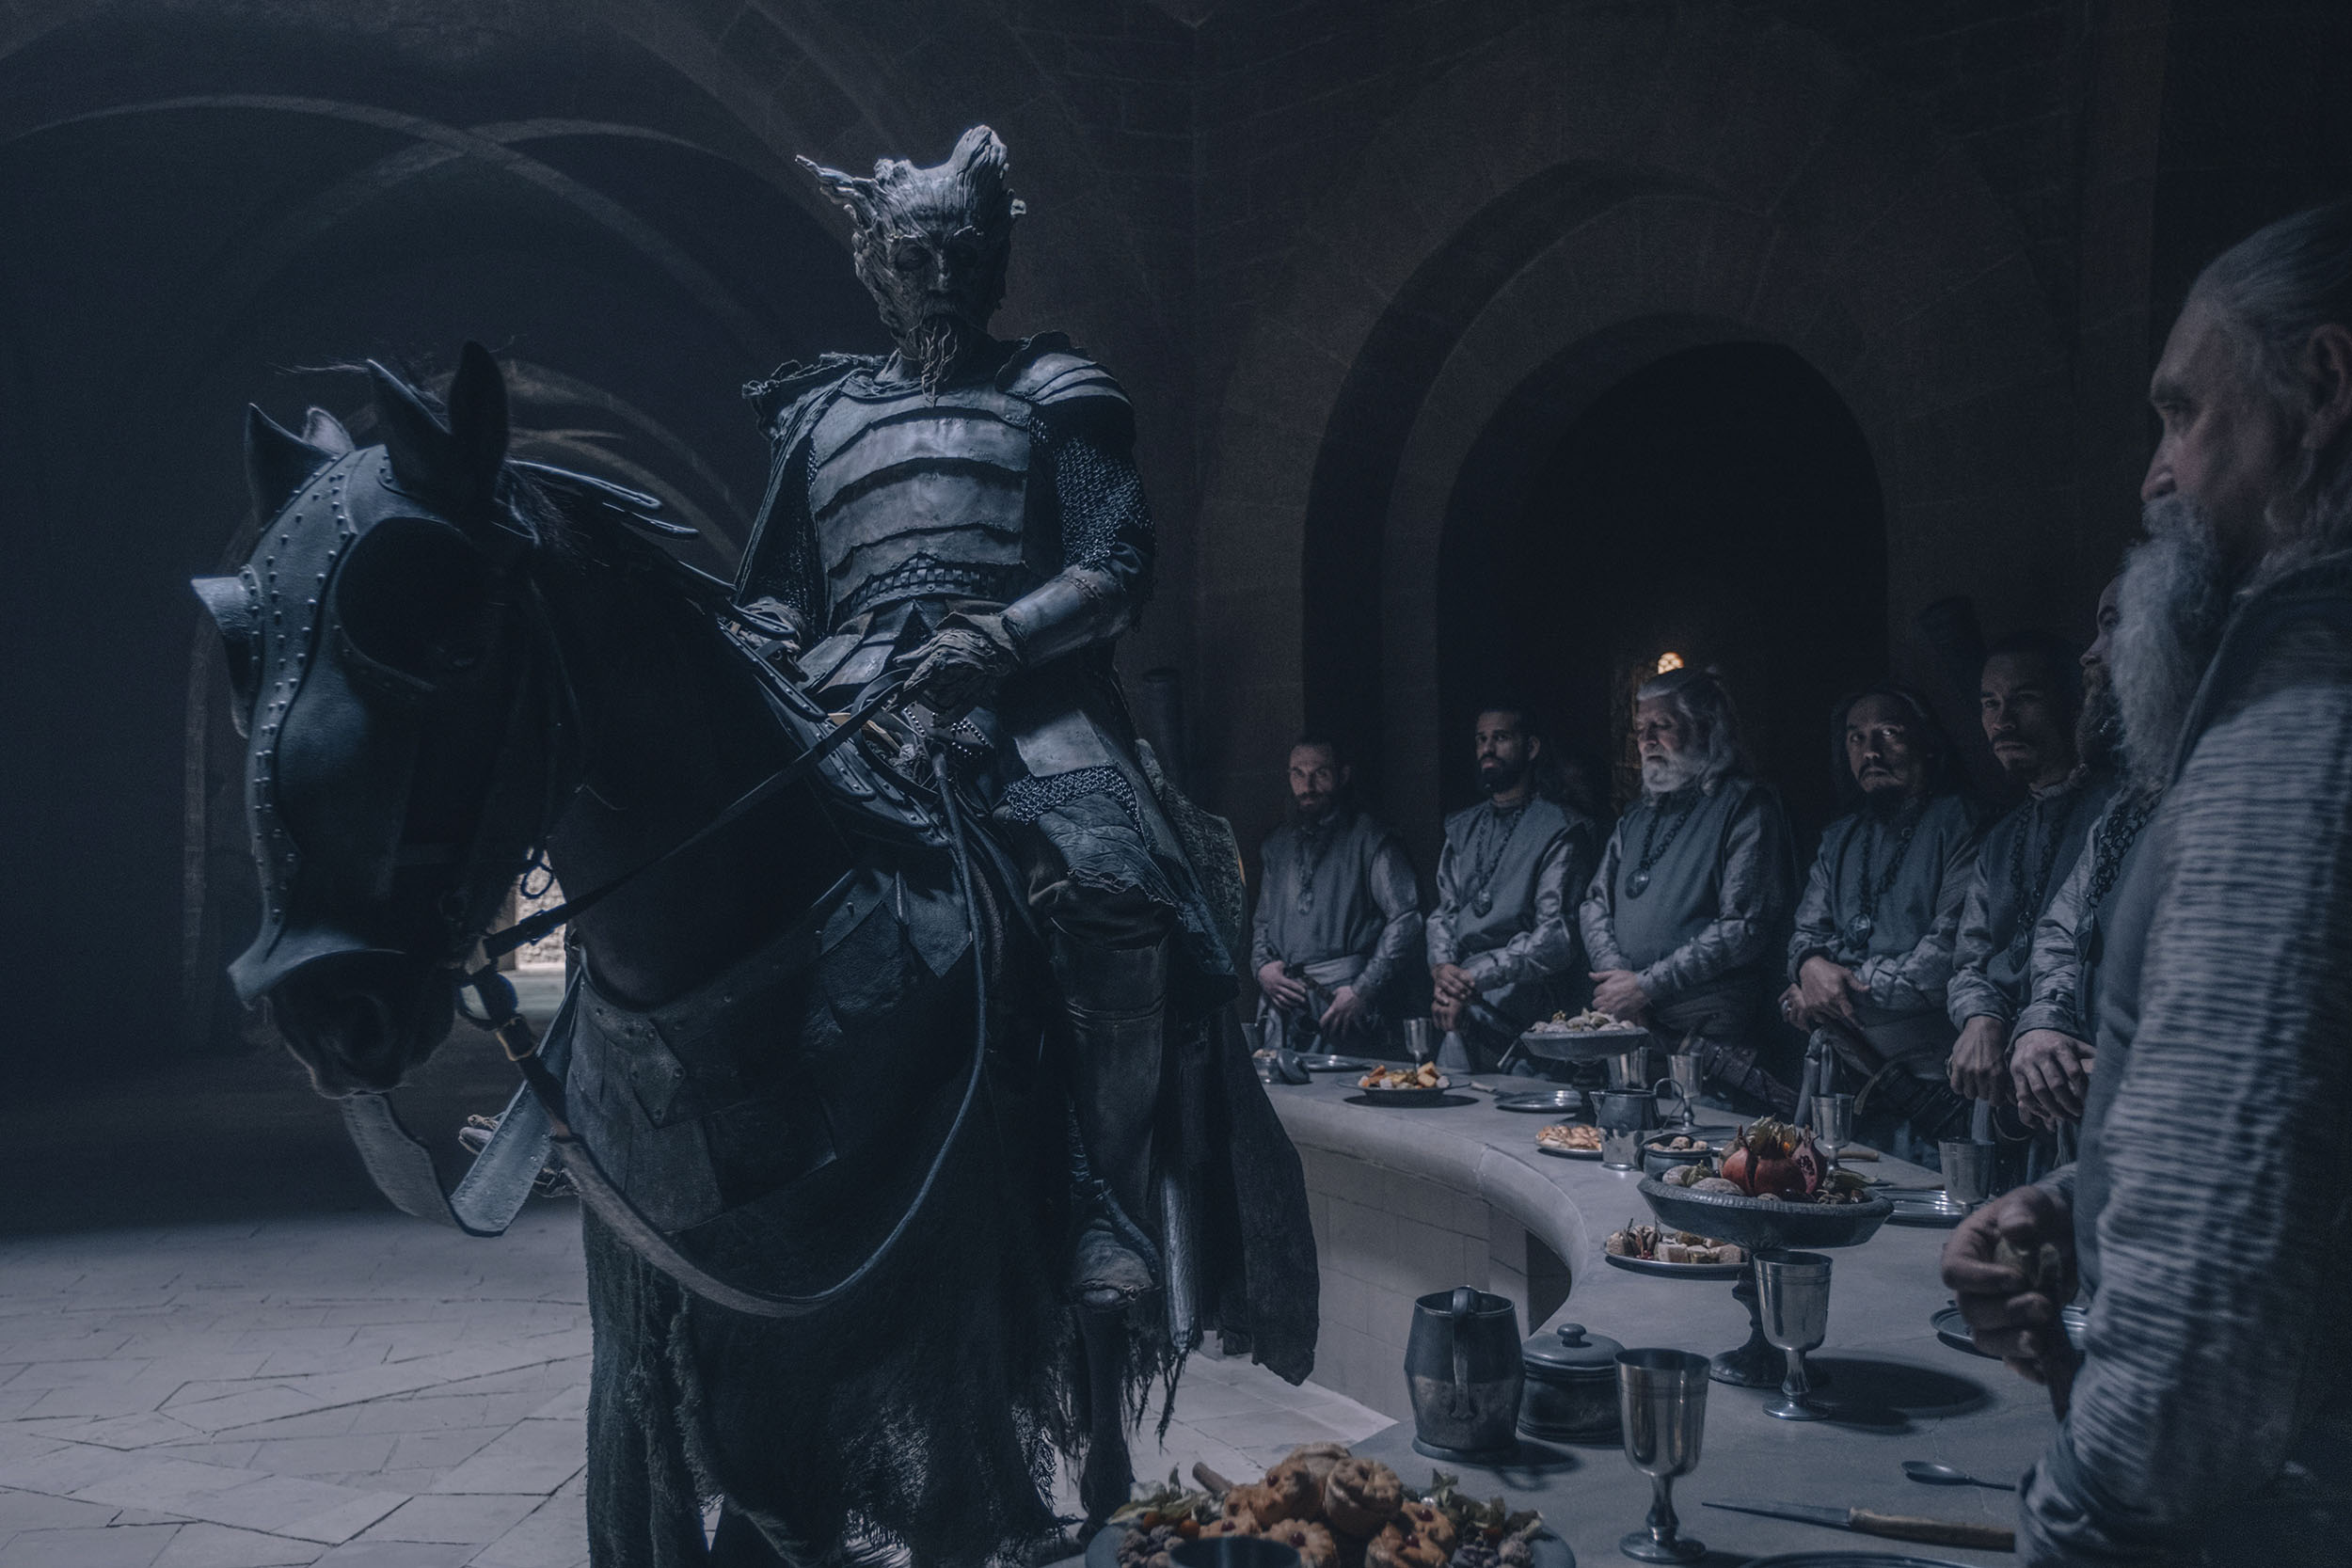 Image from the movie the Green Knight with King Arthur on his horse riding in front of the knights at an arced table